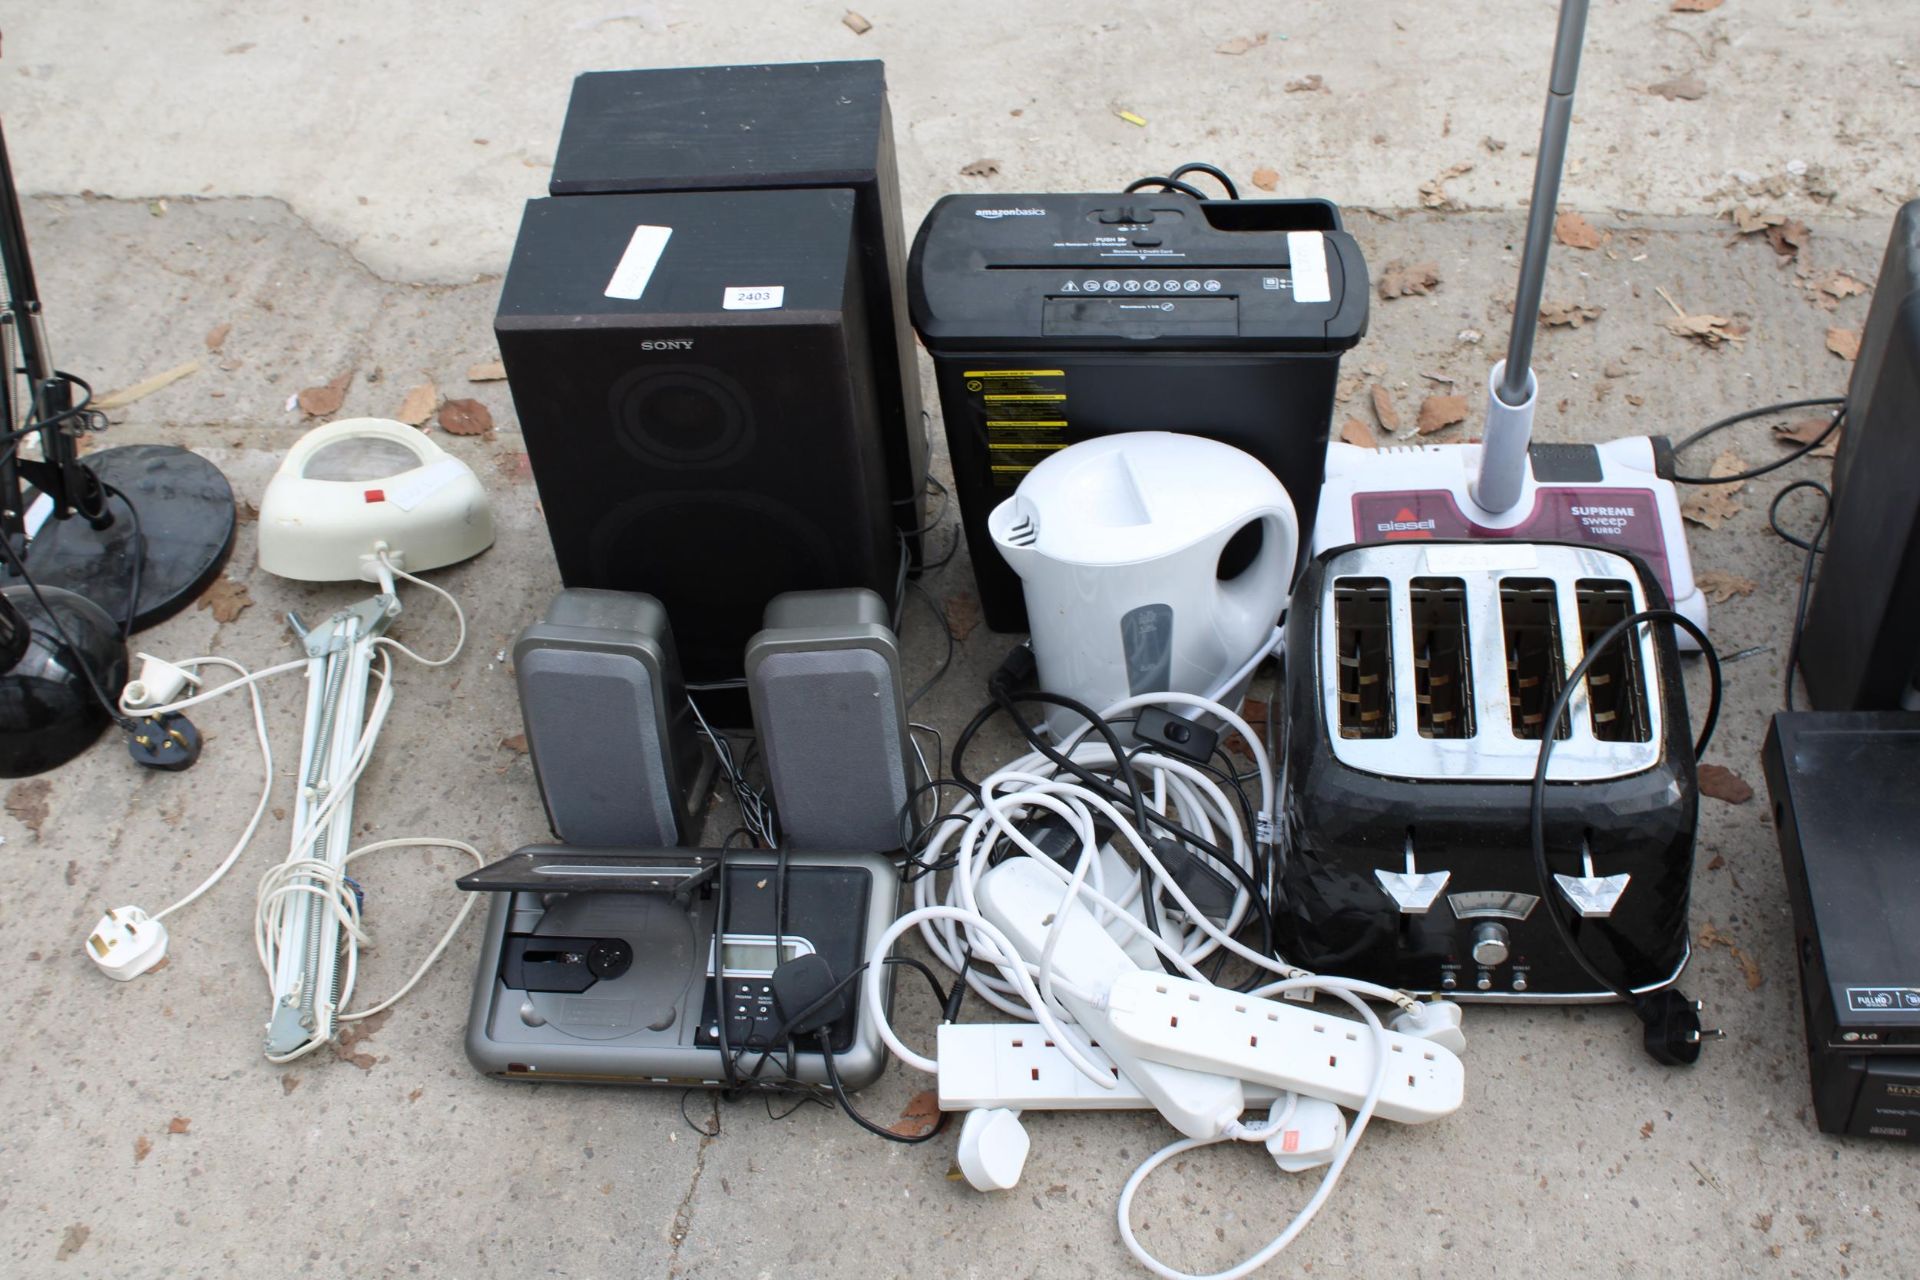 VARIOUS ITEMS TO INCLUDE A FOUR SLICE TOASTER, KETTLE, EXTENSION CABLES, SONY SPEAKERS ETC - Image 2 of 3